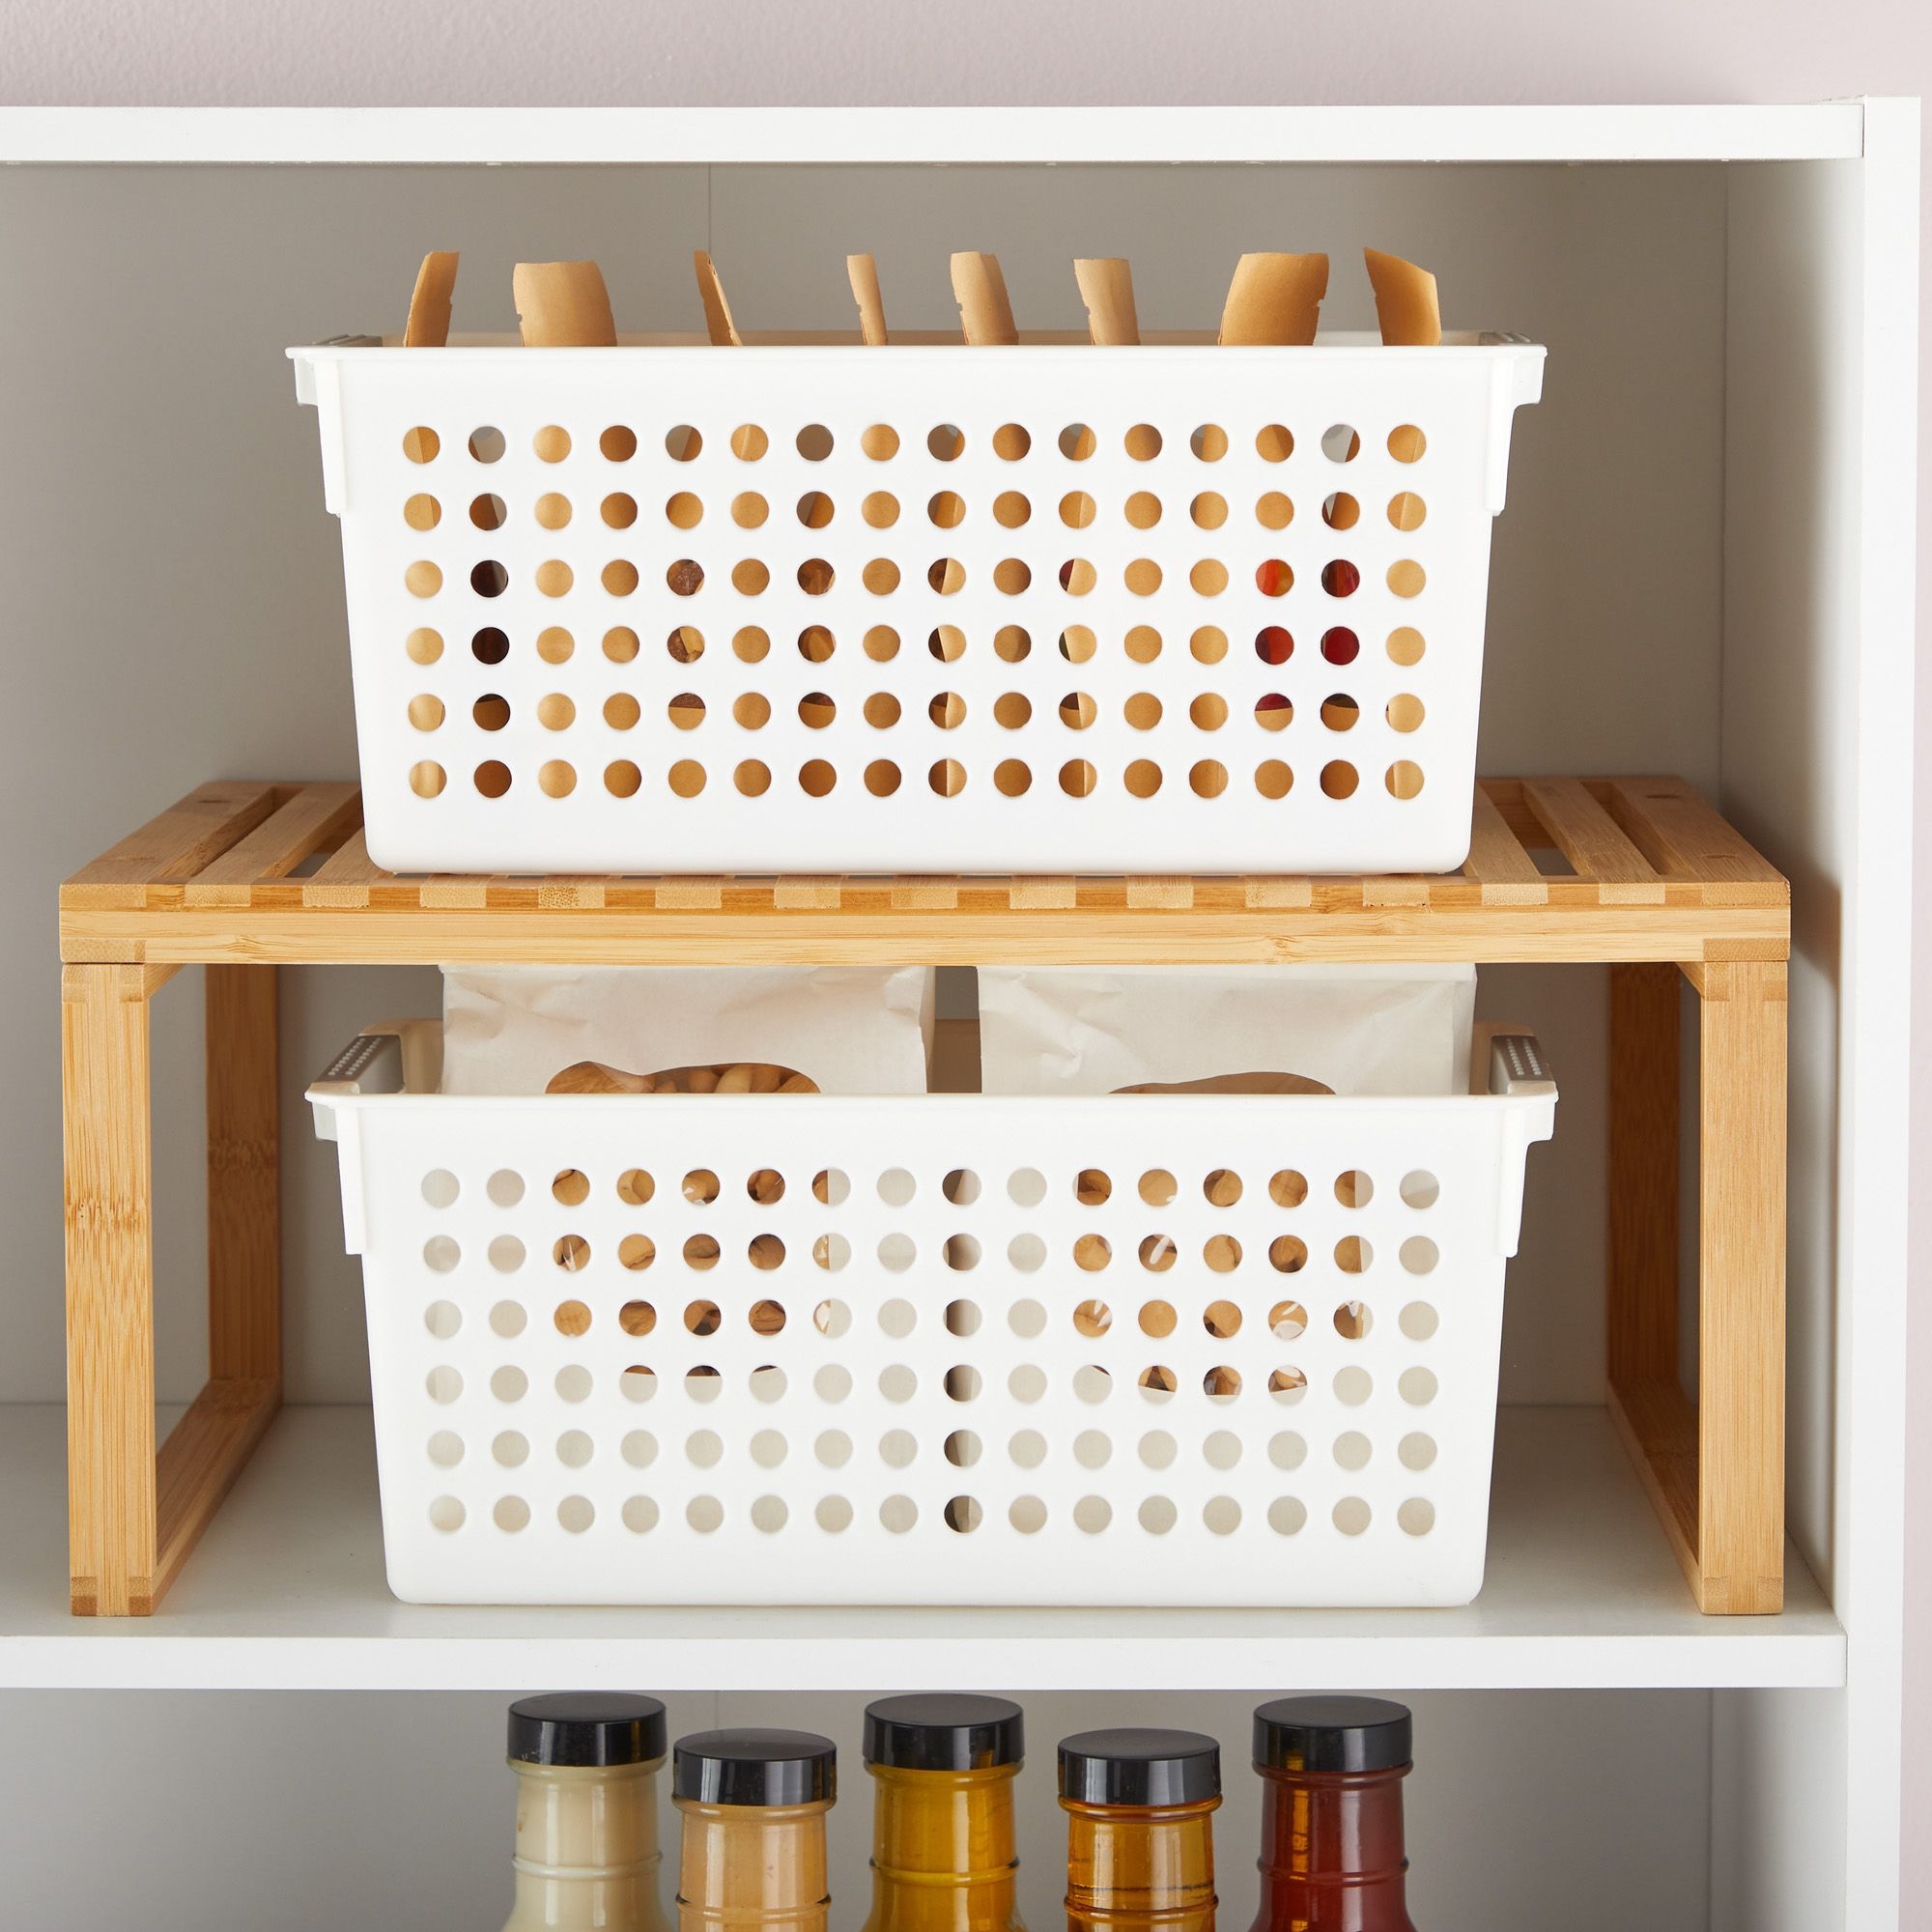 4 Pack White Plastic Baskets with Gray Handles, Narrow Storage Bins for Organizing, Kitchen and Bathroom Shelves, Small Nesting Containers (5 Inch) - image 4 of 10